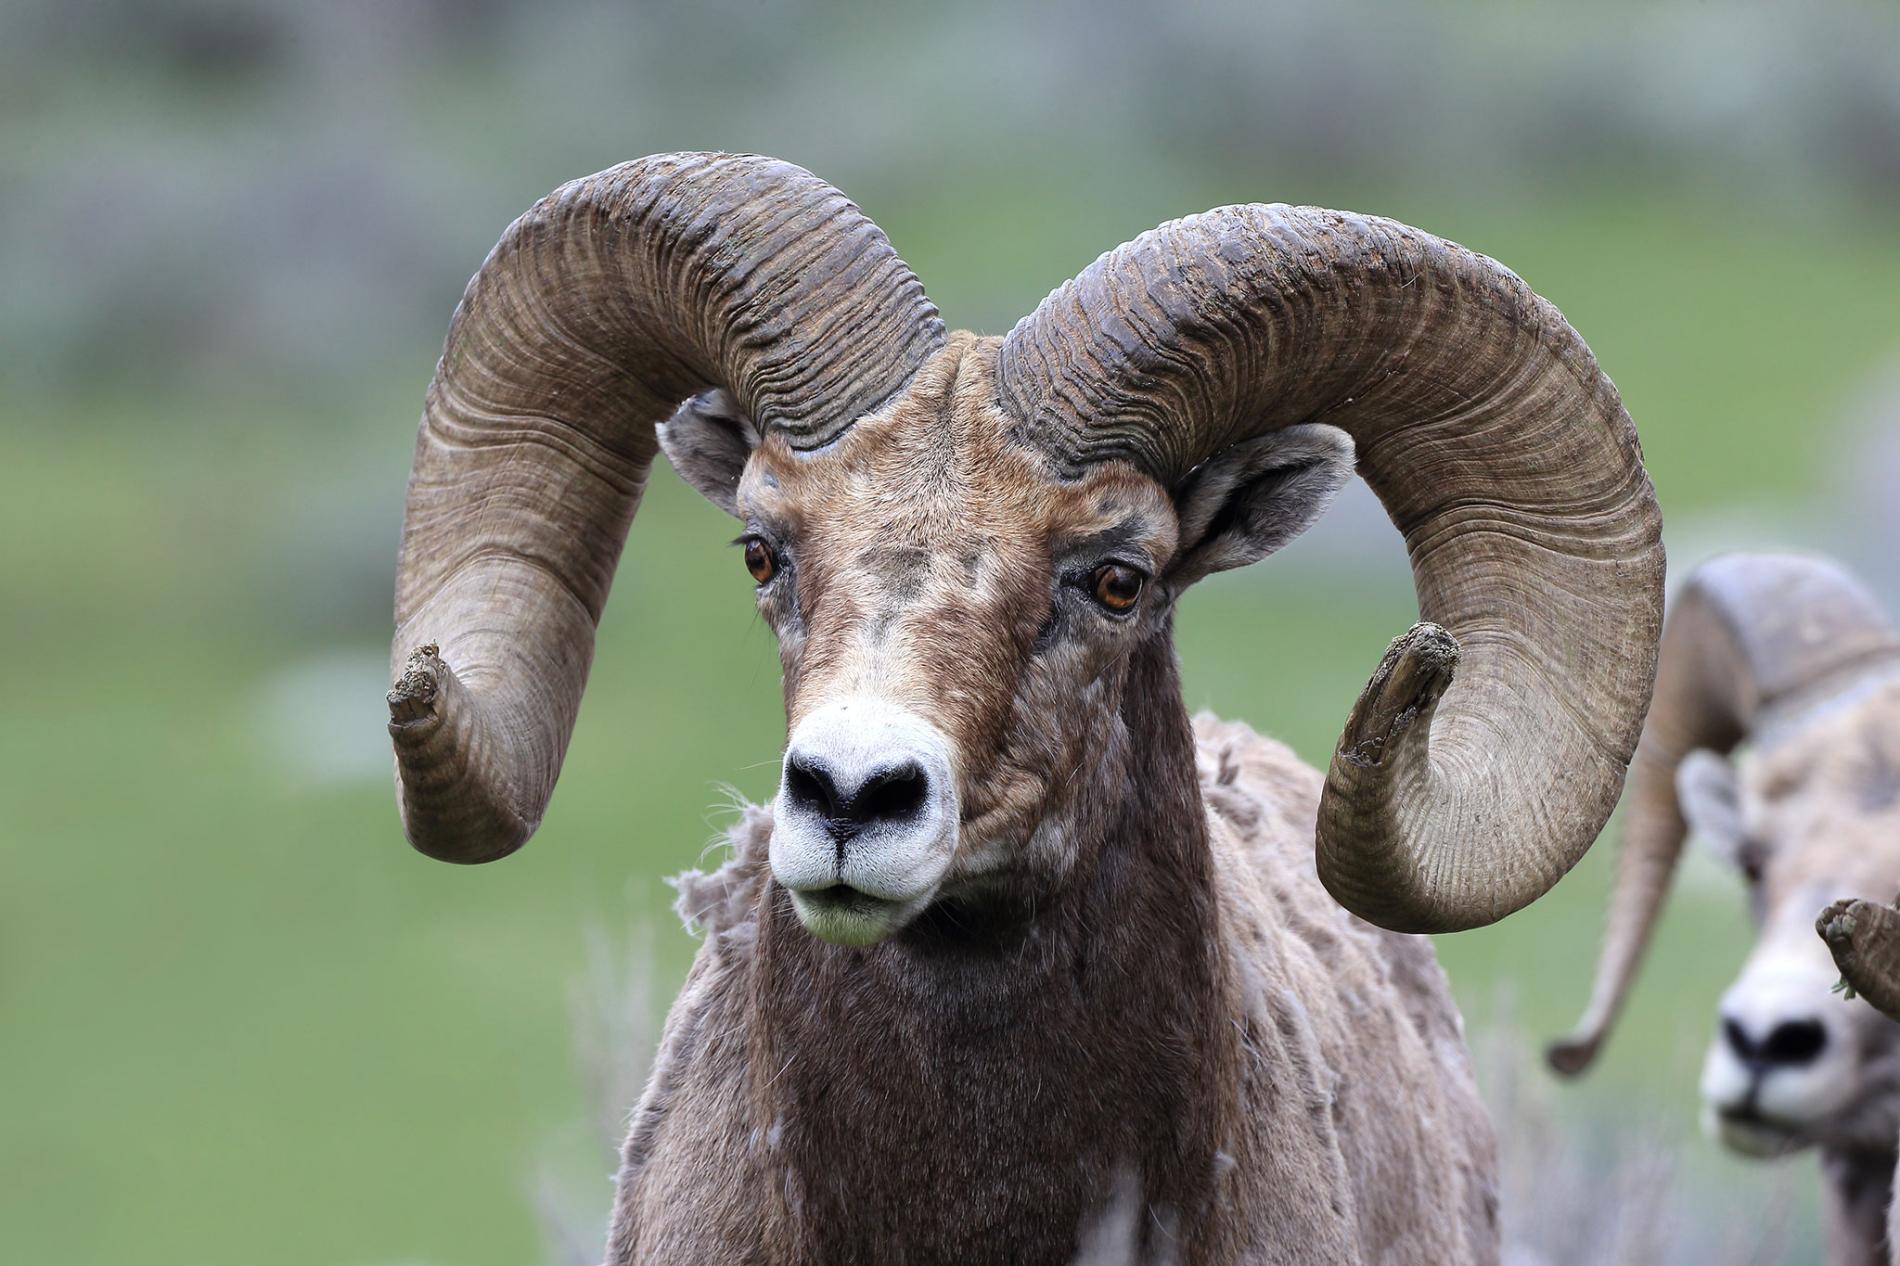 Green Horn Ram Logo - In First for Sheep Culture, Migration Routes Passed Down